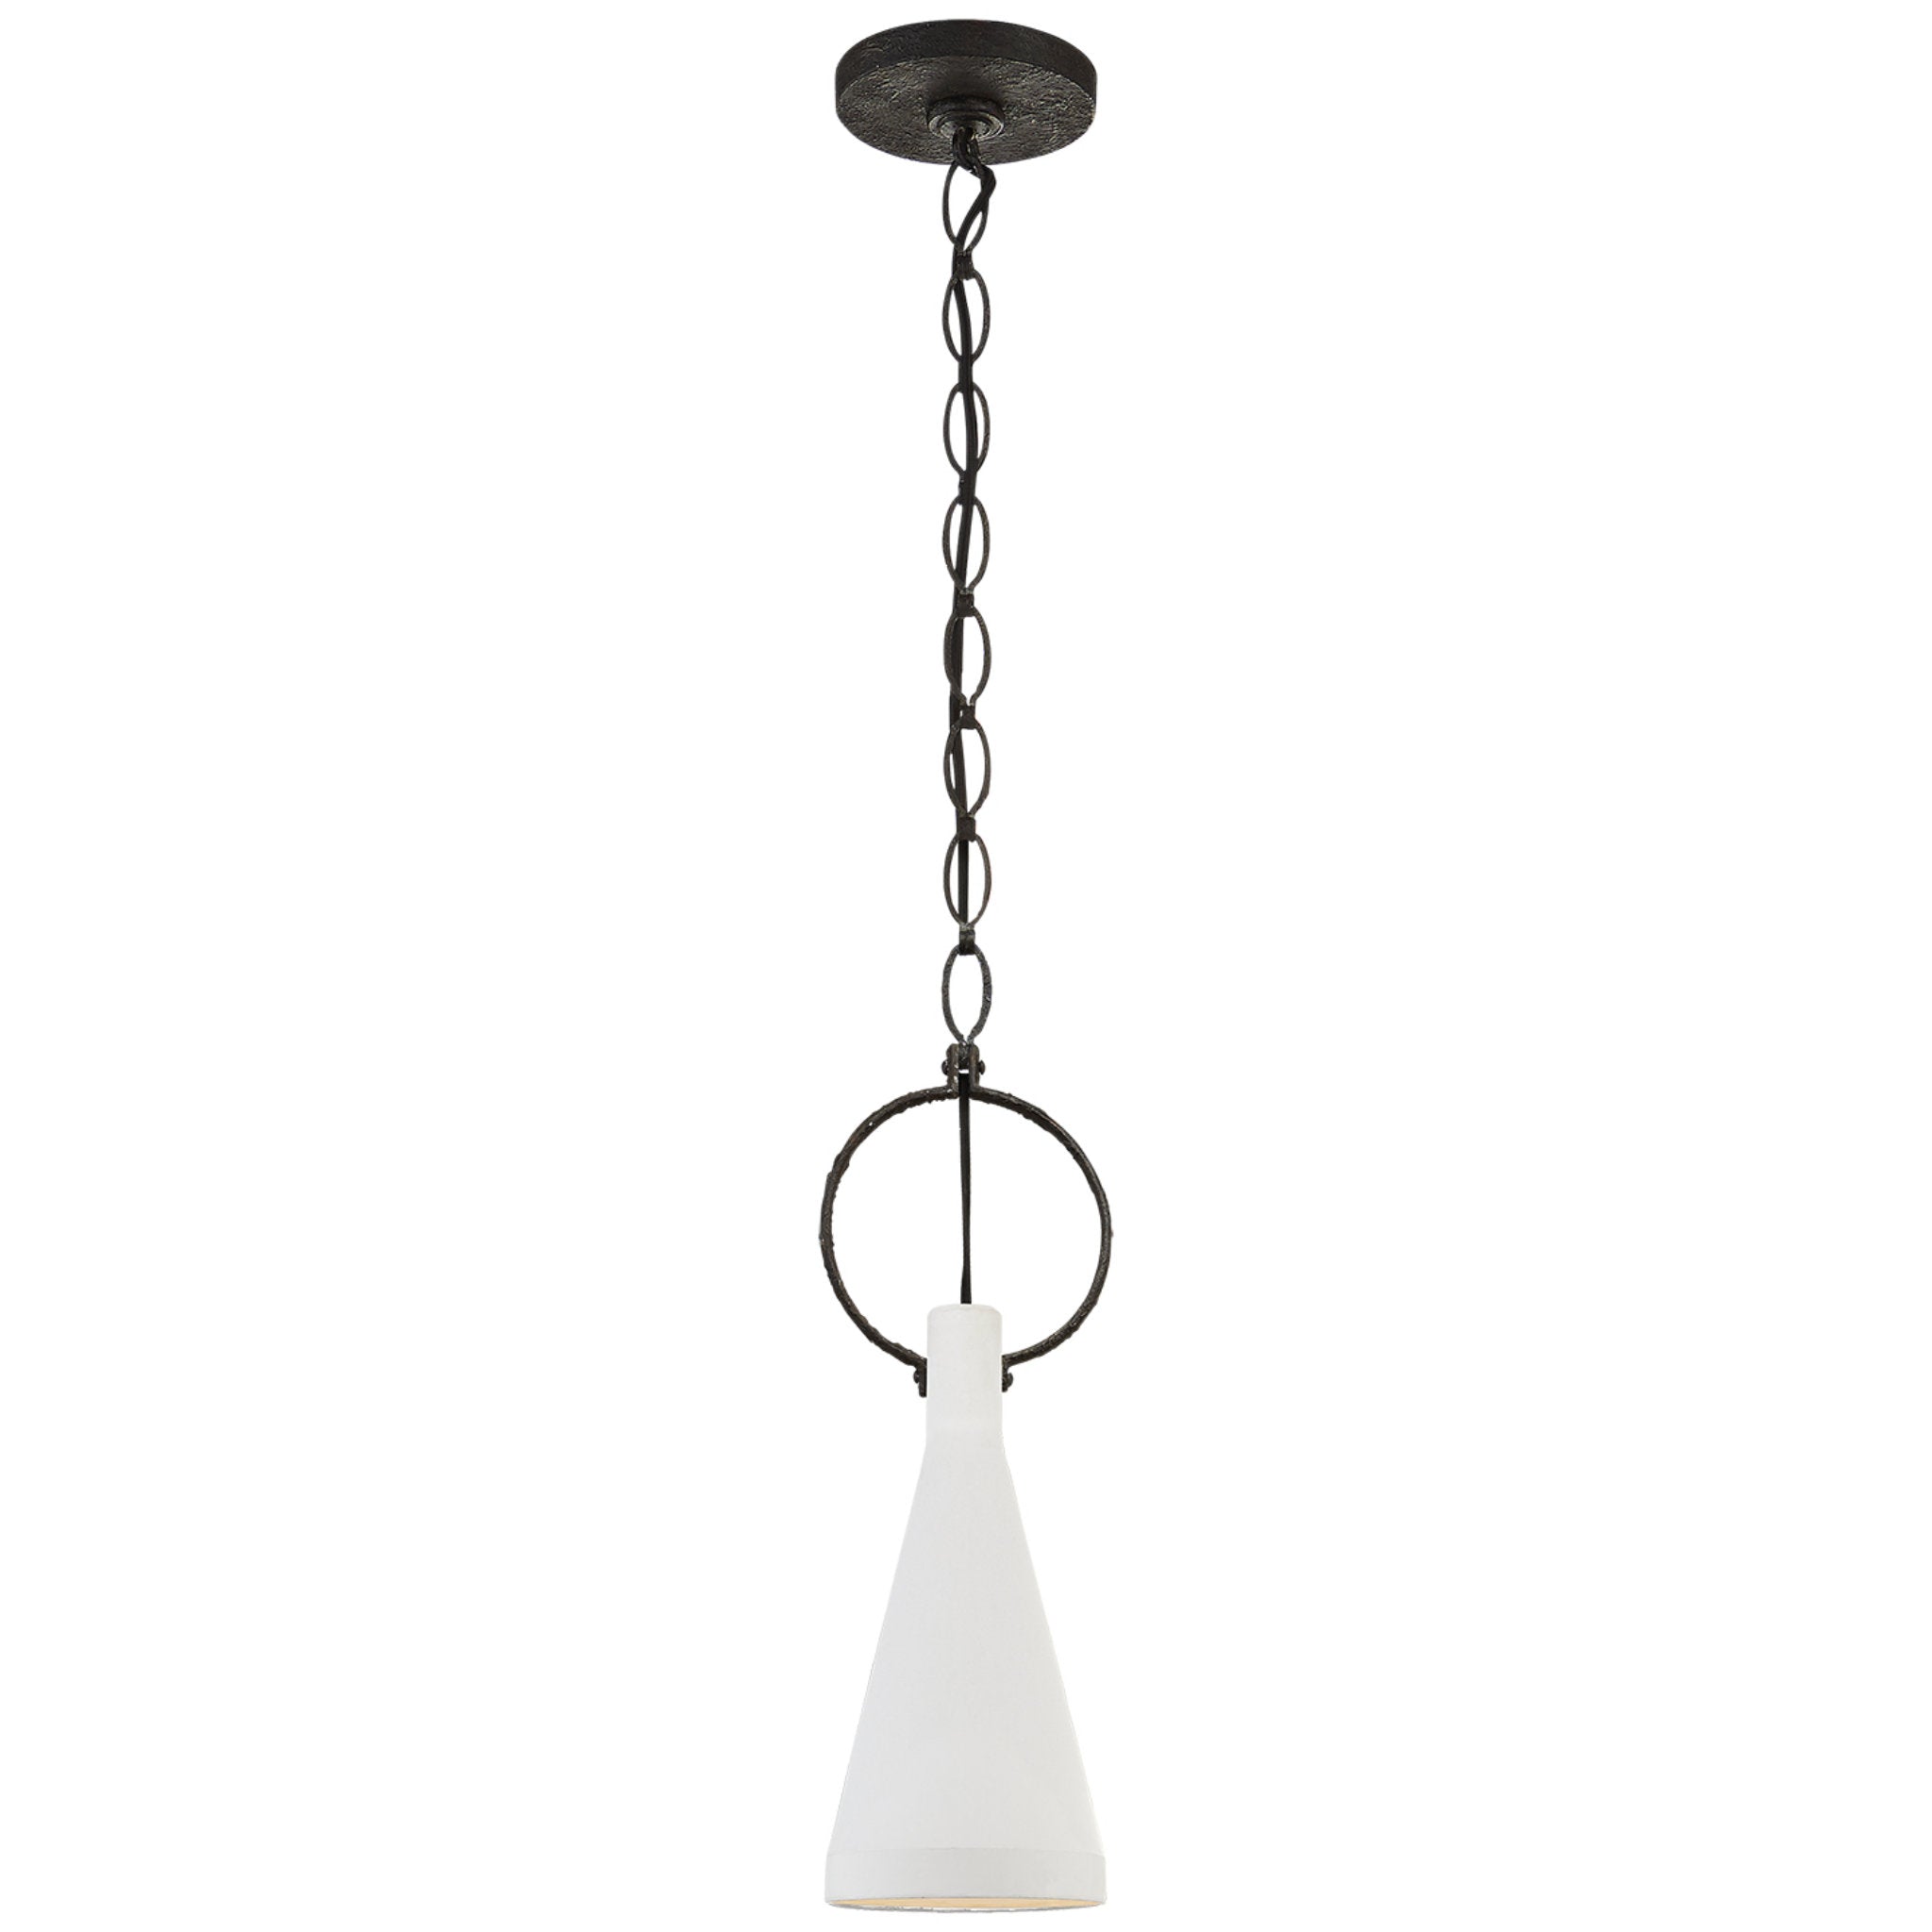 Suzanne Kasler Limoges Small Pendant in Natural Rust with Plaster White Shade